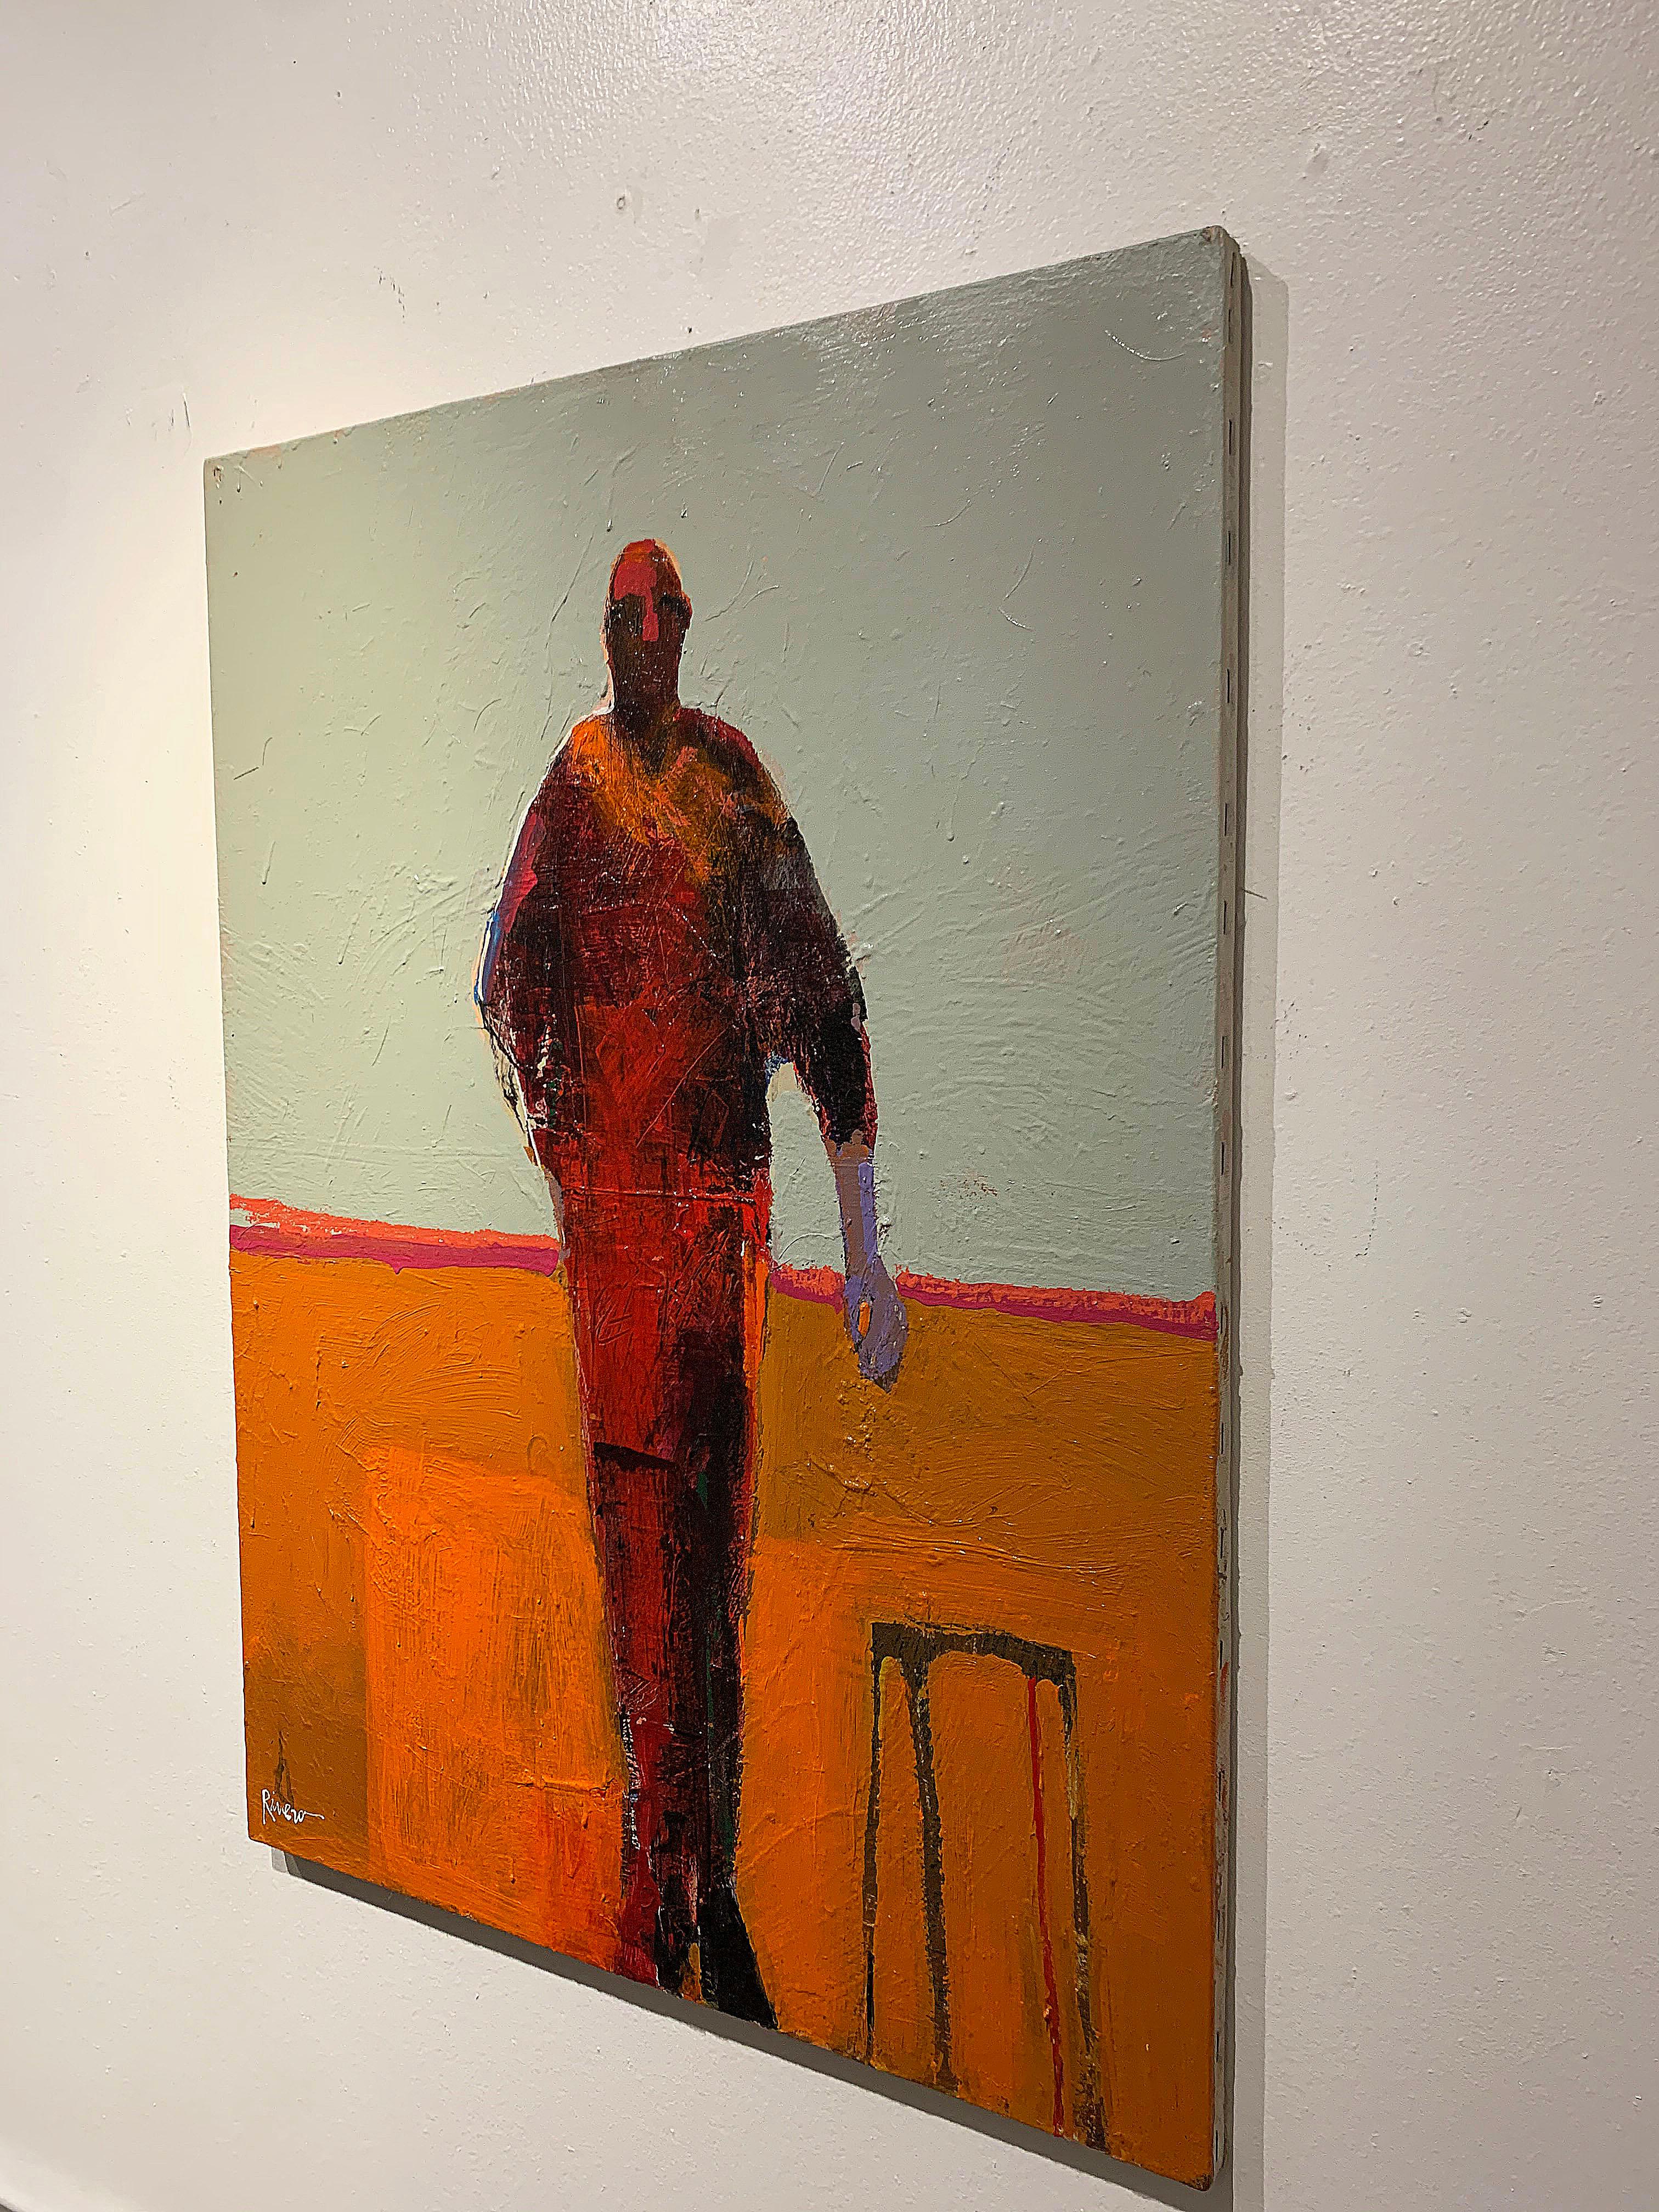 Personaje with Stool, standing figurative painting, orange and taupe - Orange Figurative Painting by Mike Rivero 